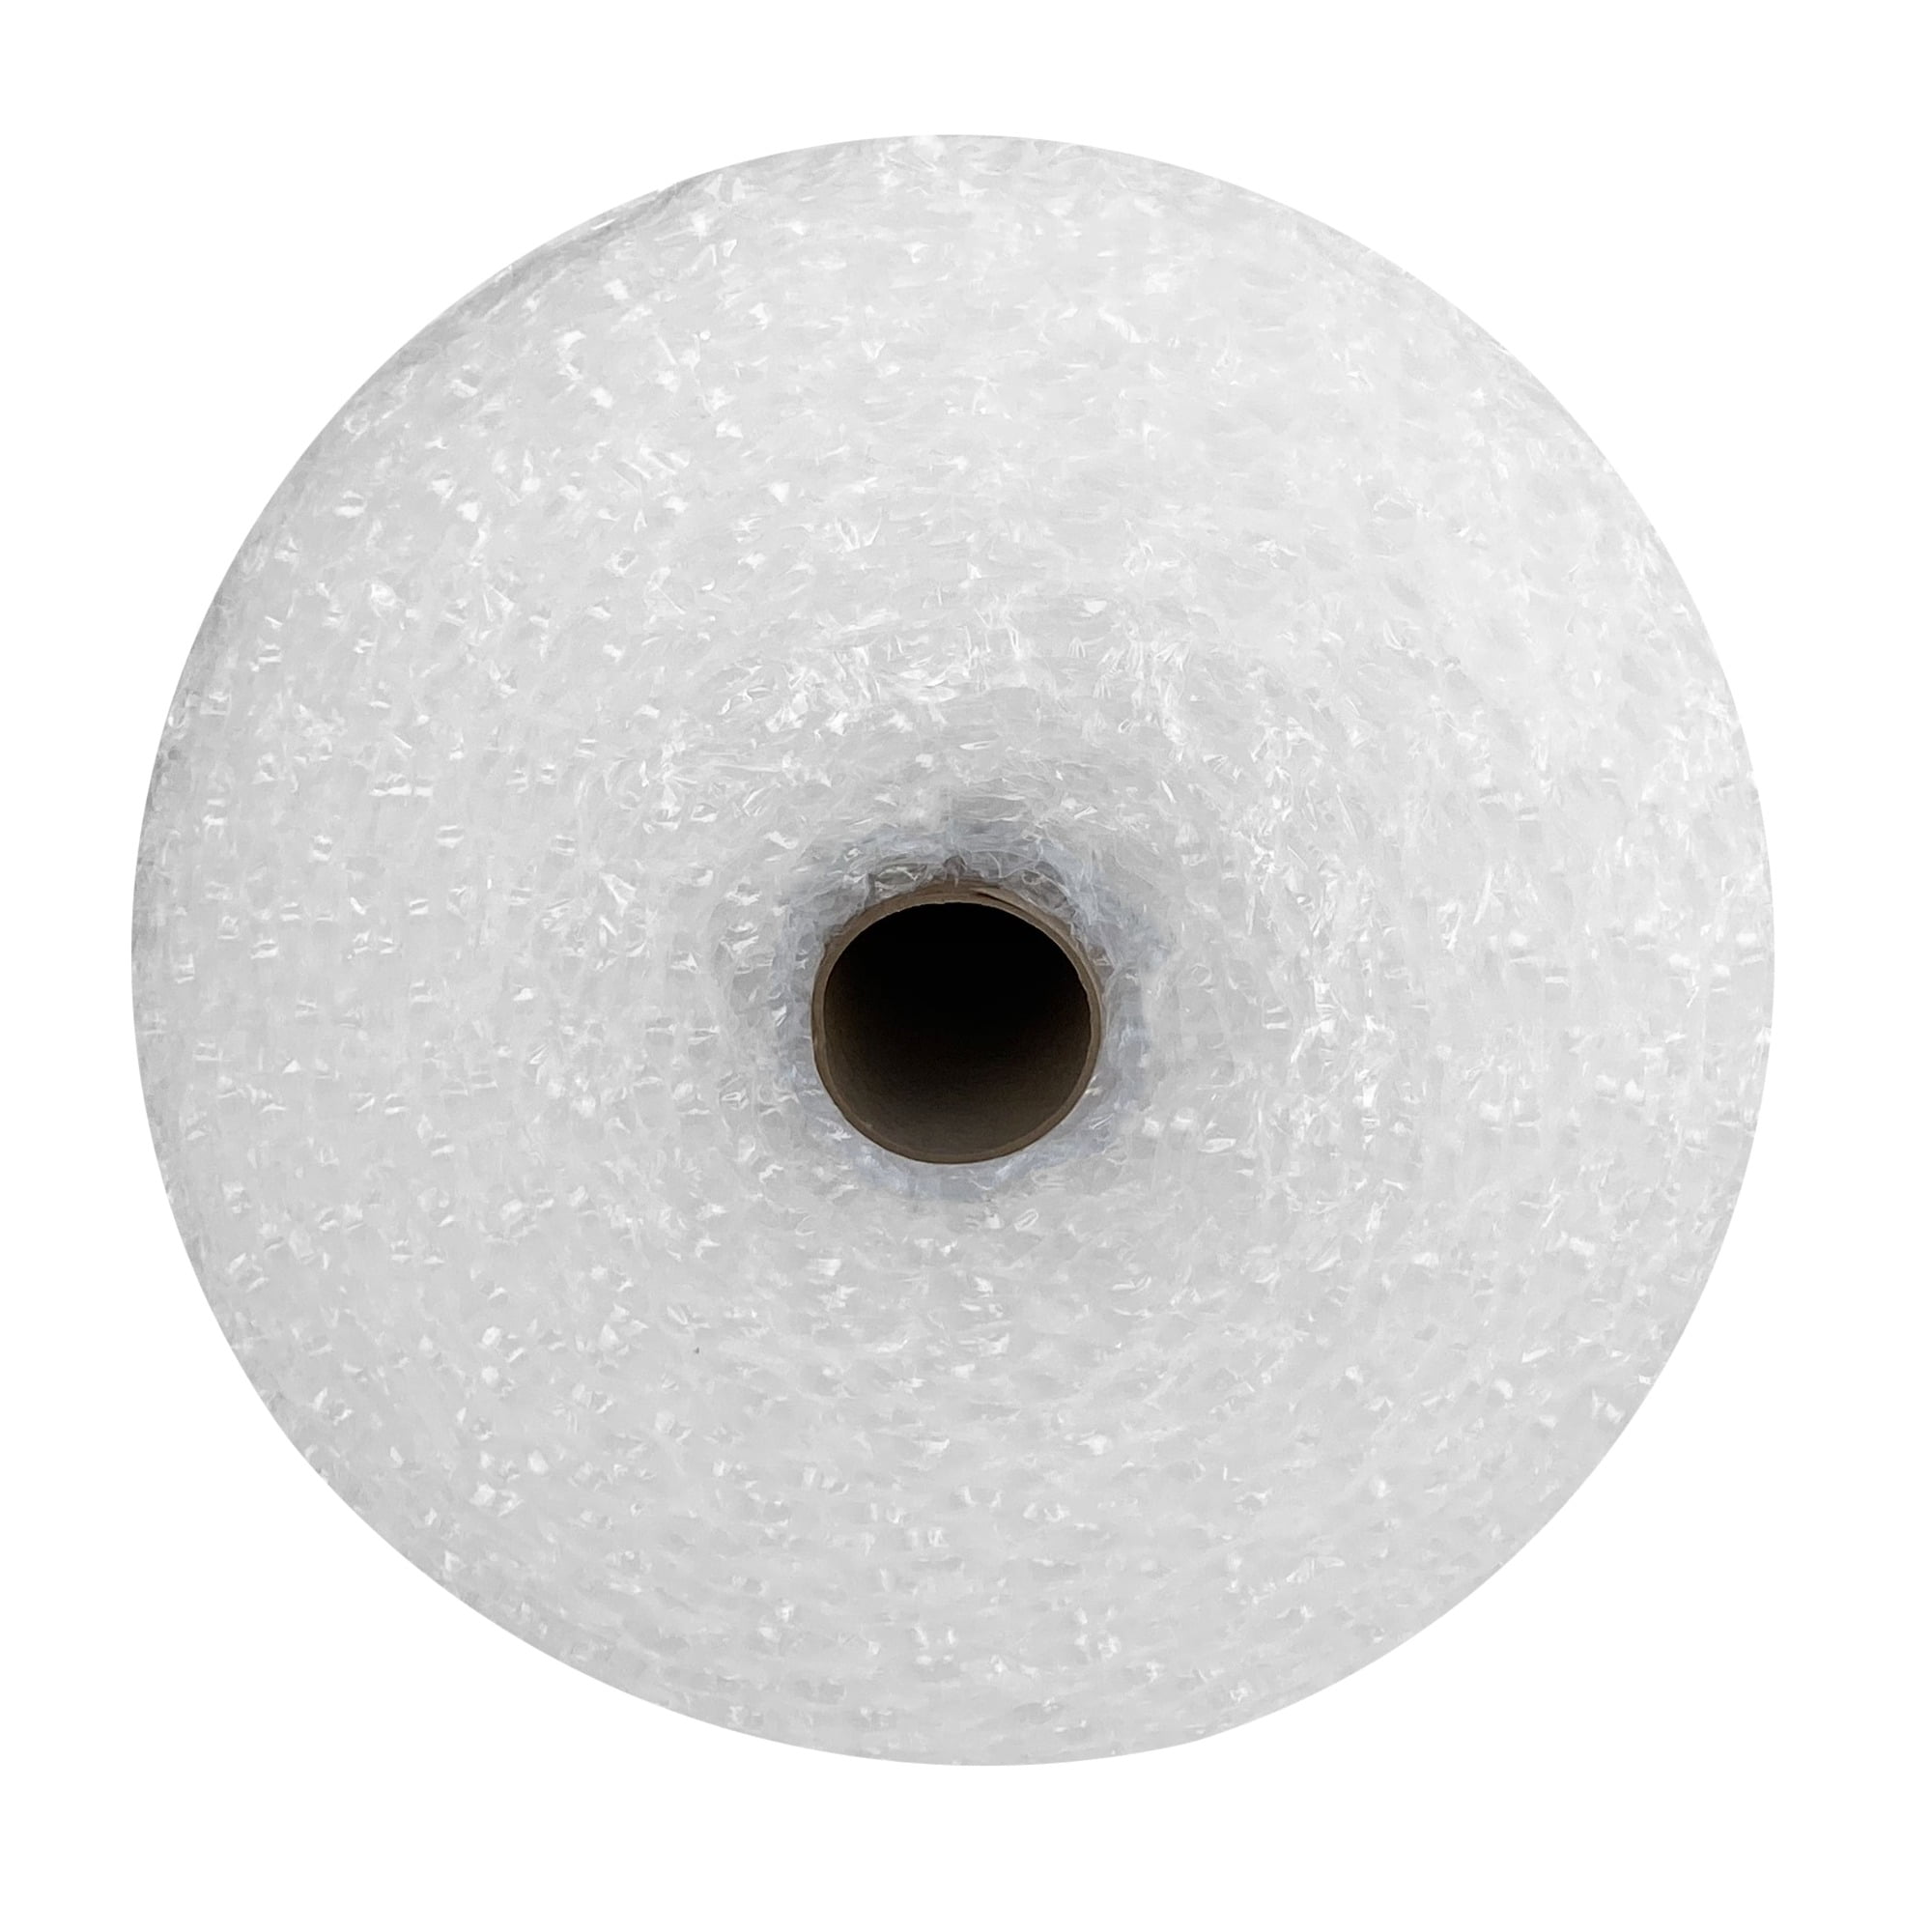 Bubble wrap 100 ft² 1/2 Large Bubble- Perforated Every 12''- with 10  Fragile Stickers by Fresh Farm LLC